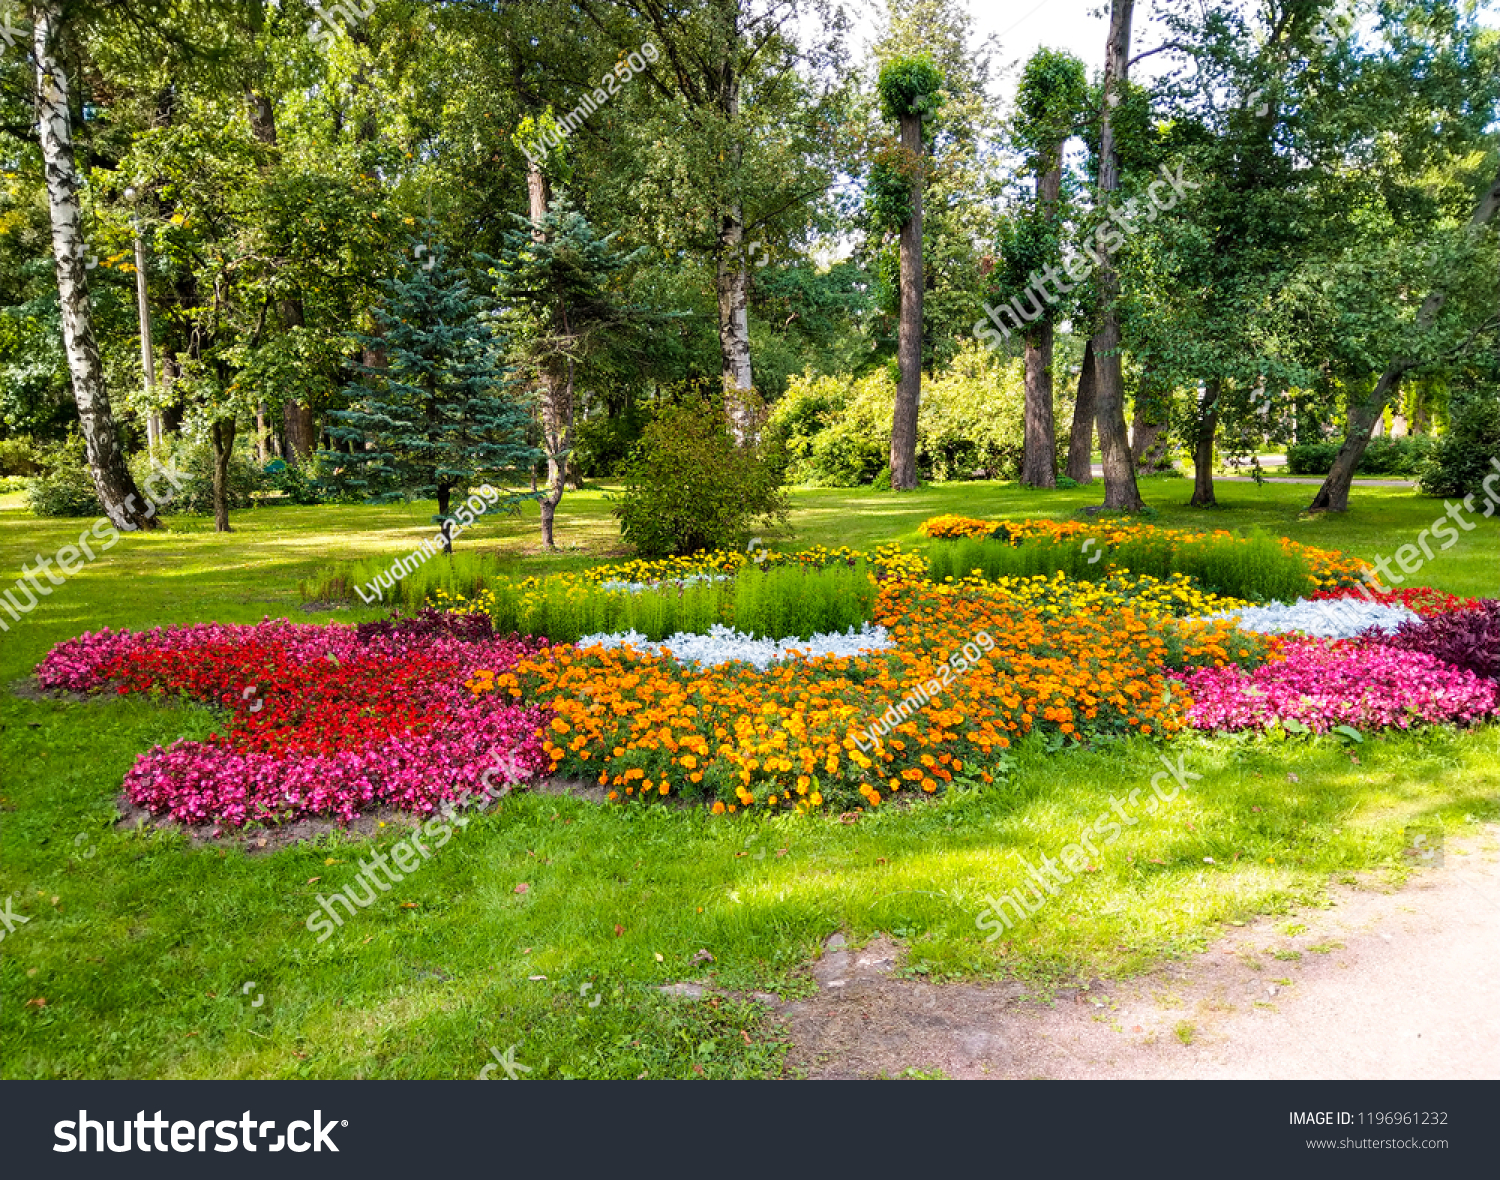 Beautiful Garden Flowers Pictures - Top 15 Most Beautiful Flowers You Can Grow In Your Garden Immediately Trees Com - A place for flower lovers and green thumbs to see breathtaking floral displays and inspirational gardens.